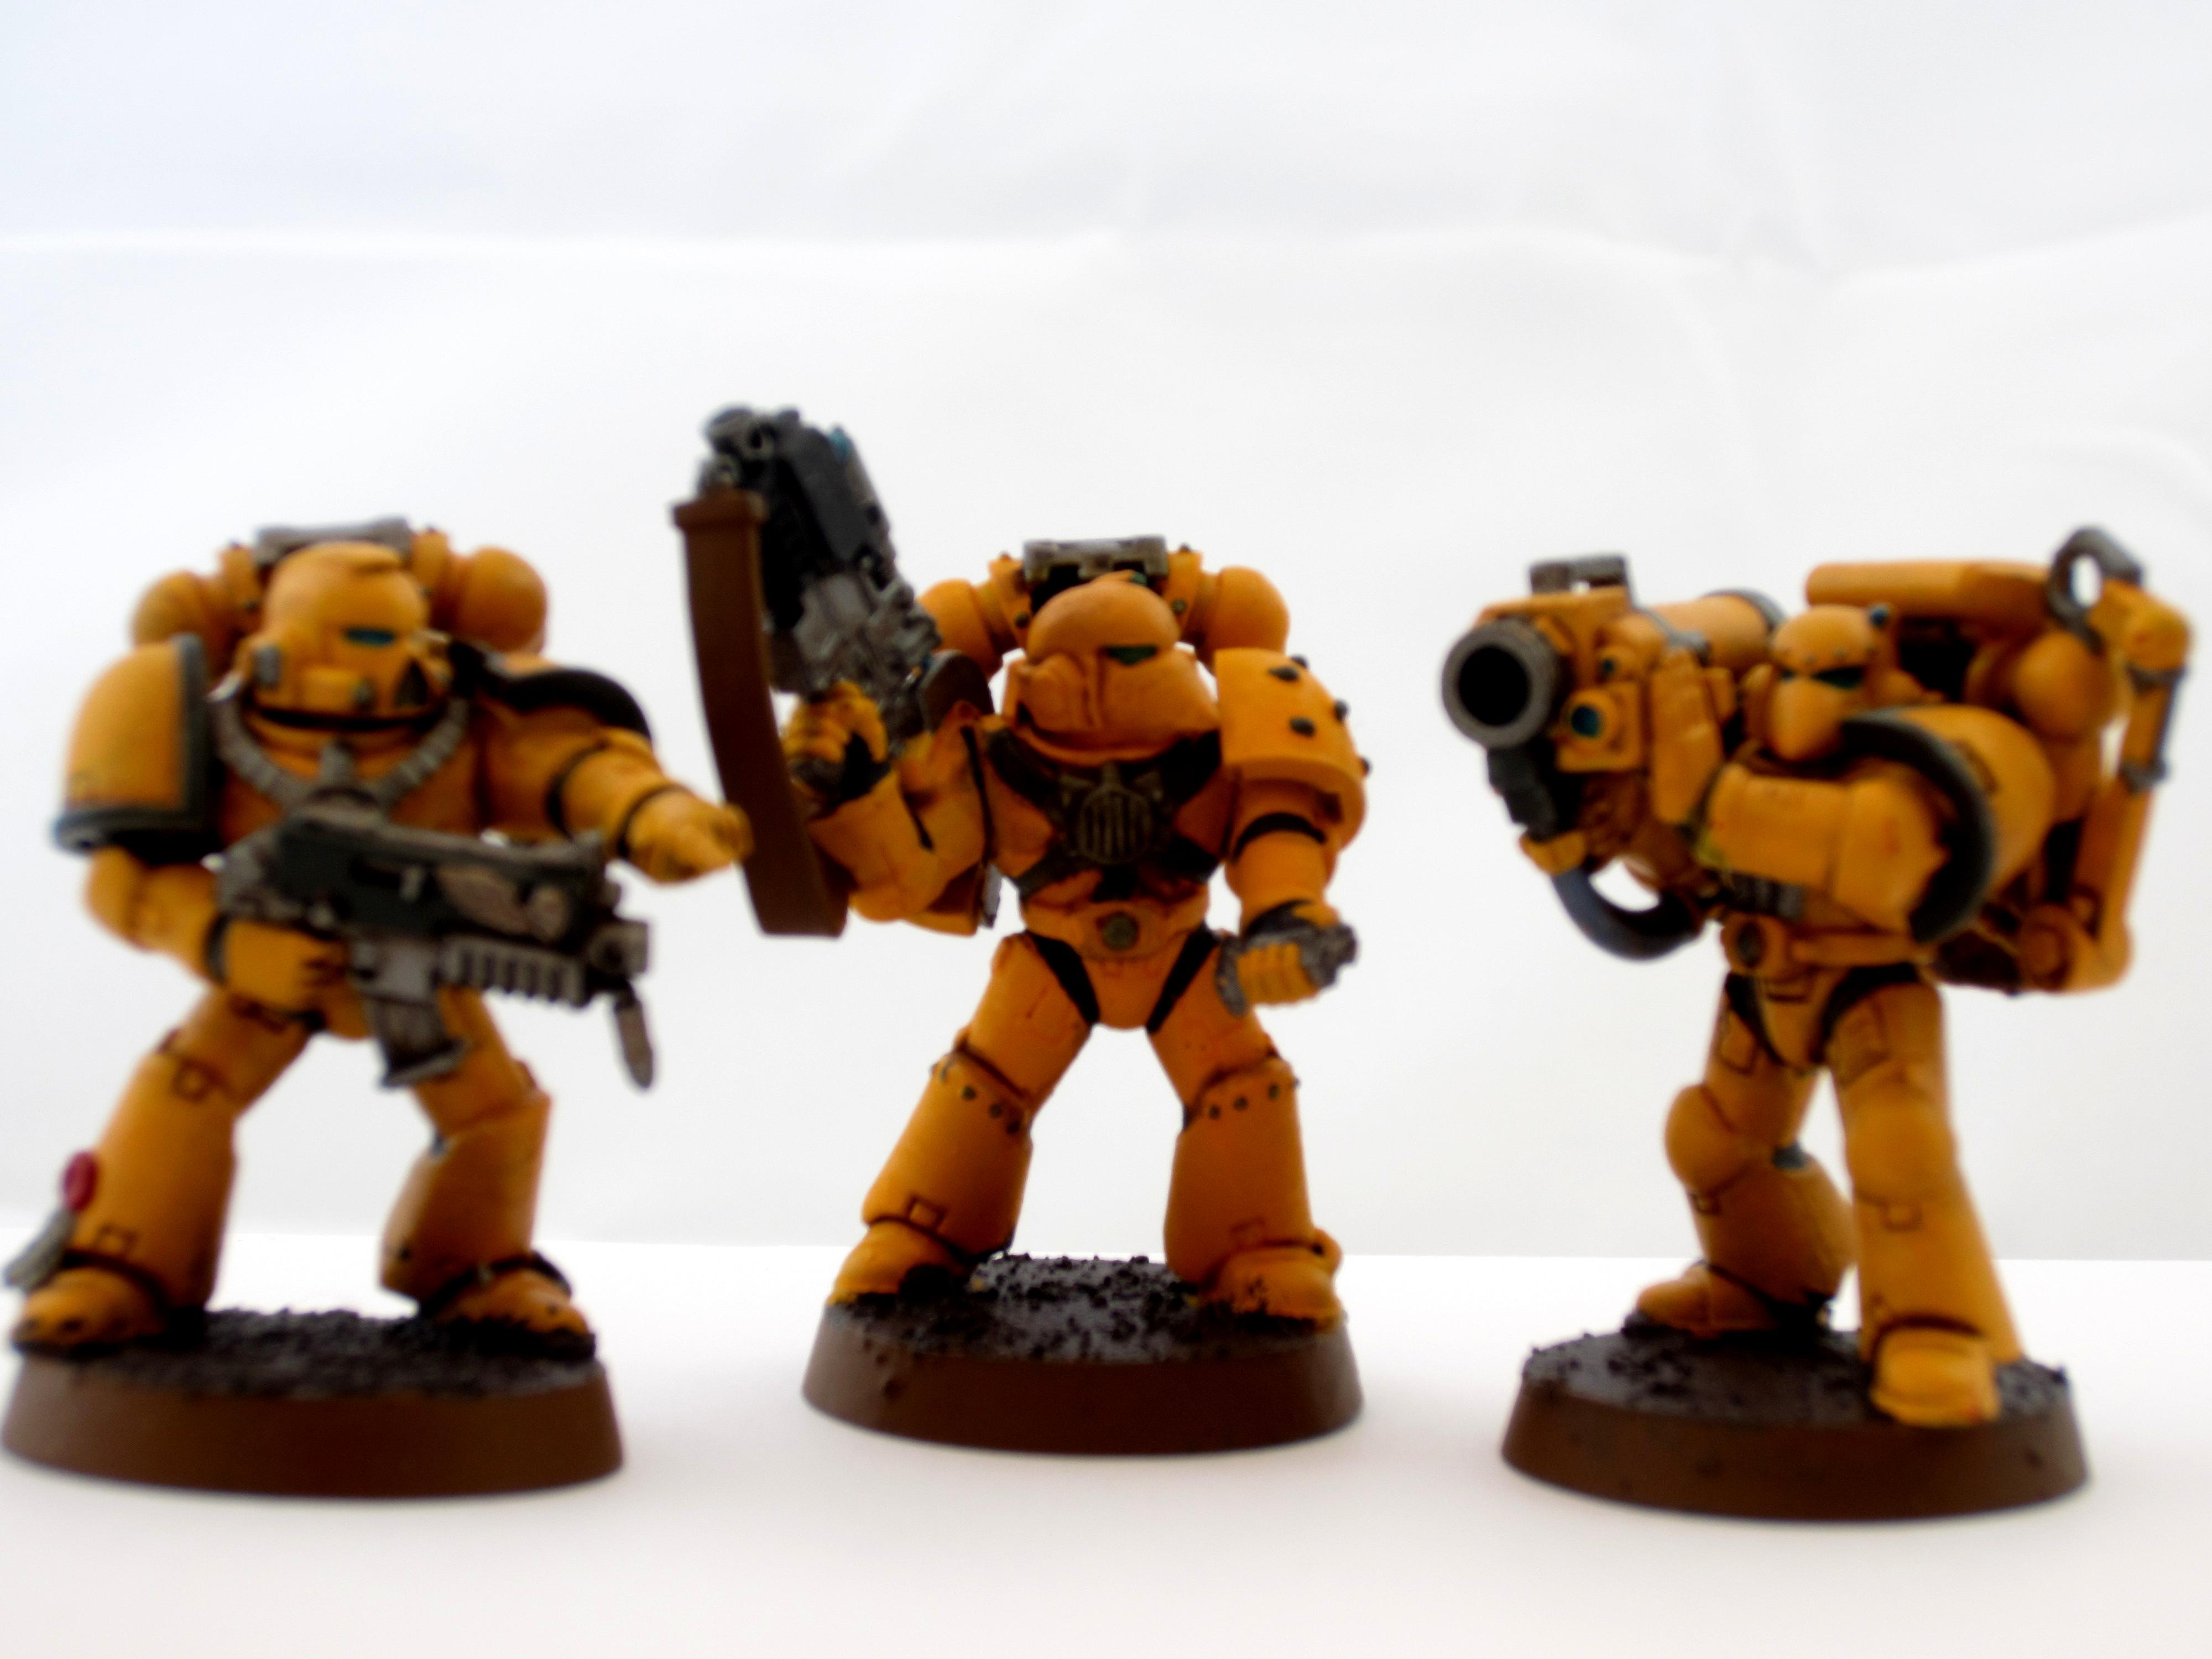 Imperial Fists, Imperial Fists